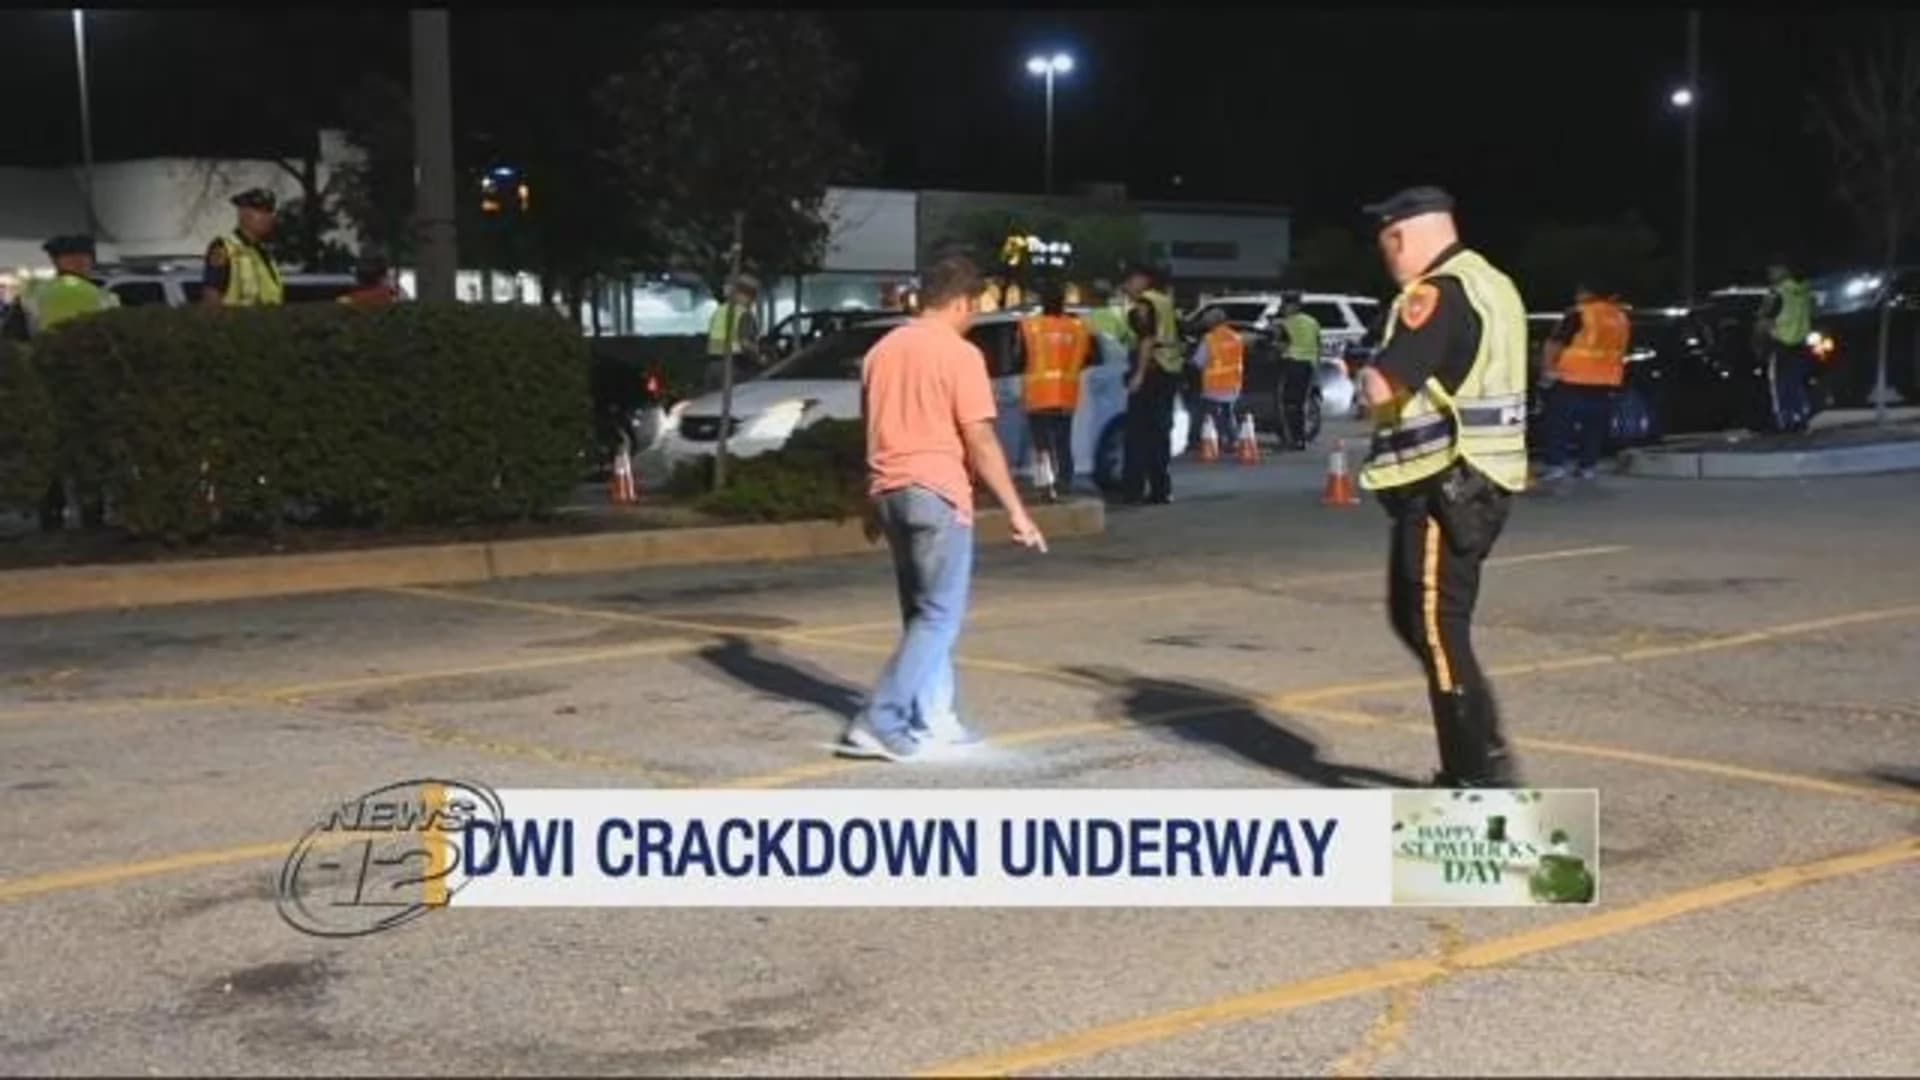 State police launch DWI crackdown for St. Patrick's Day weekend